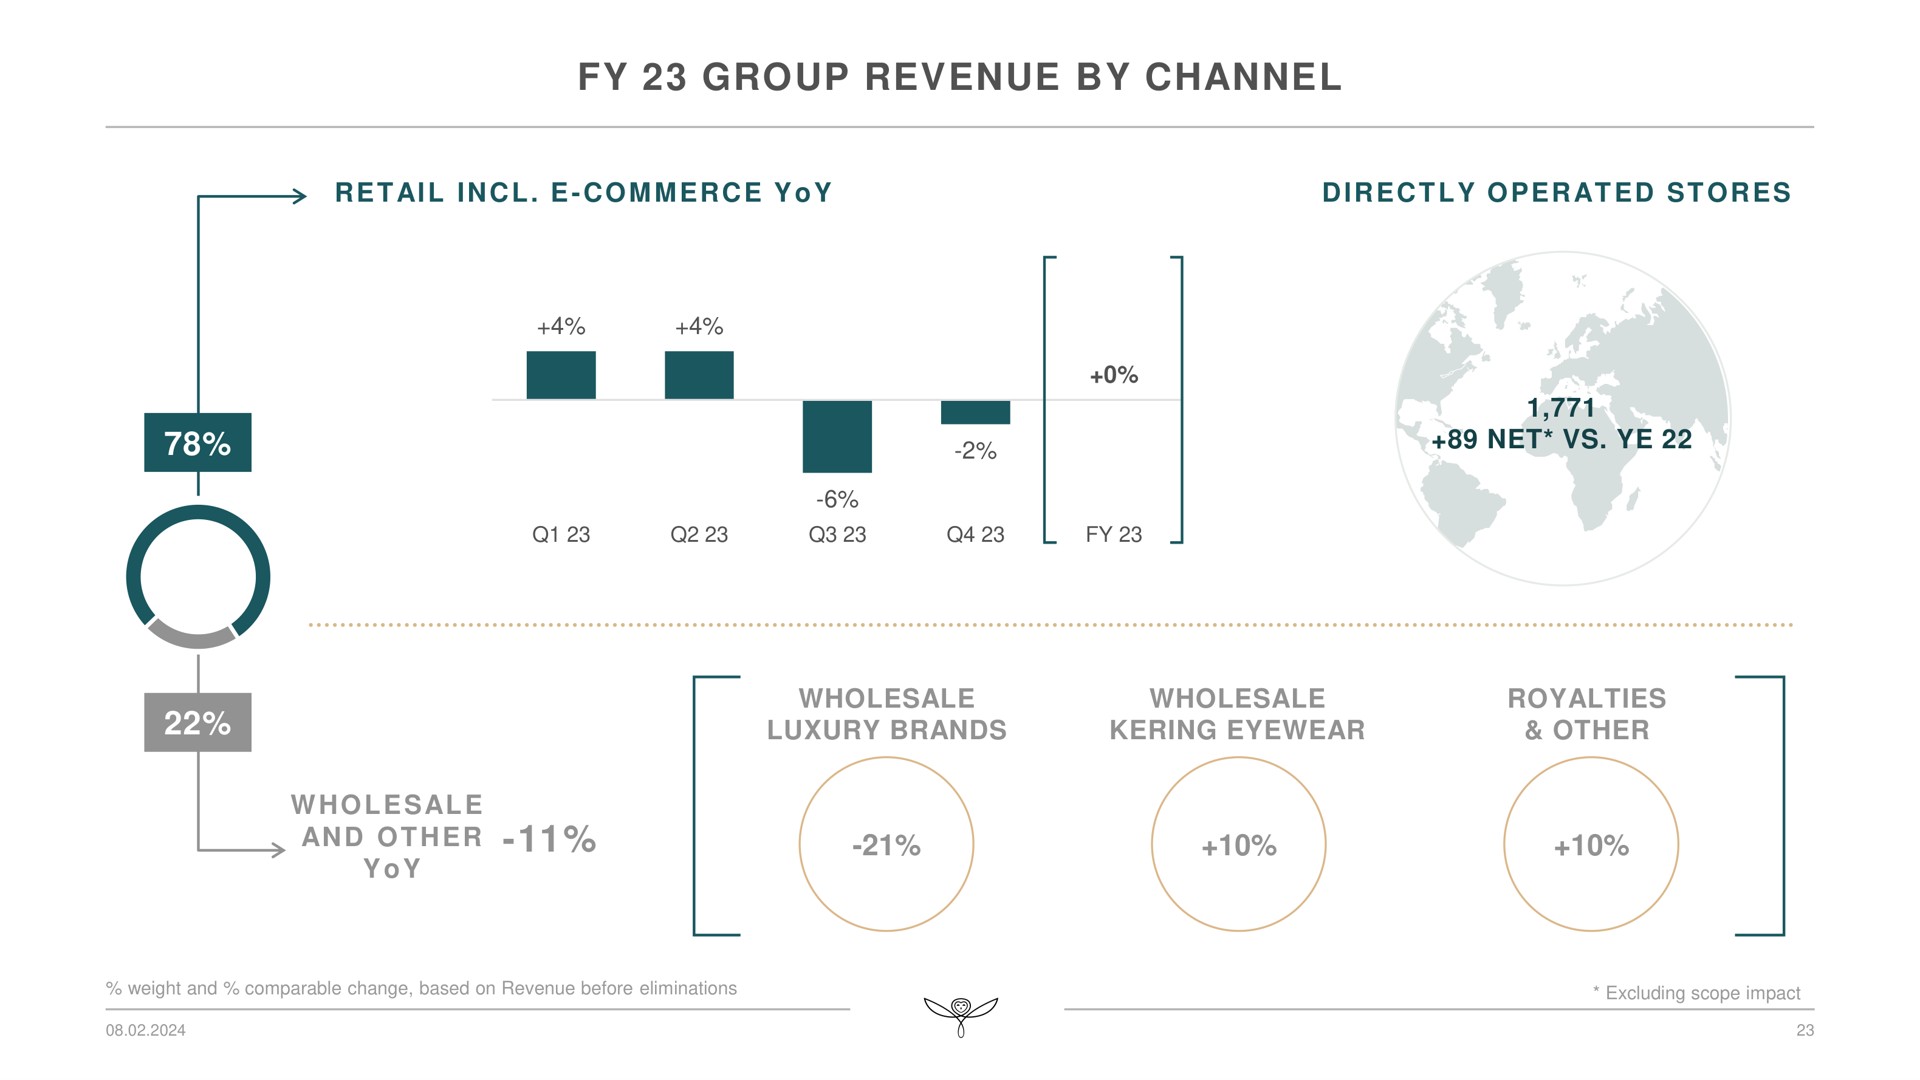 group revenue by channel and other | Kering